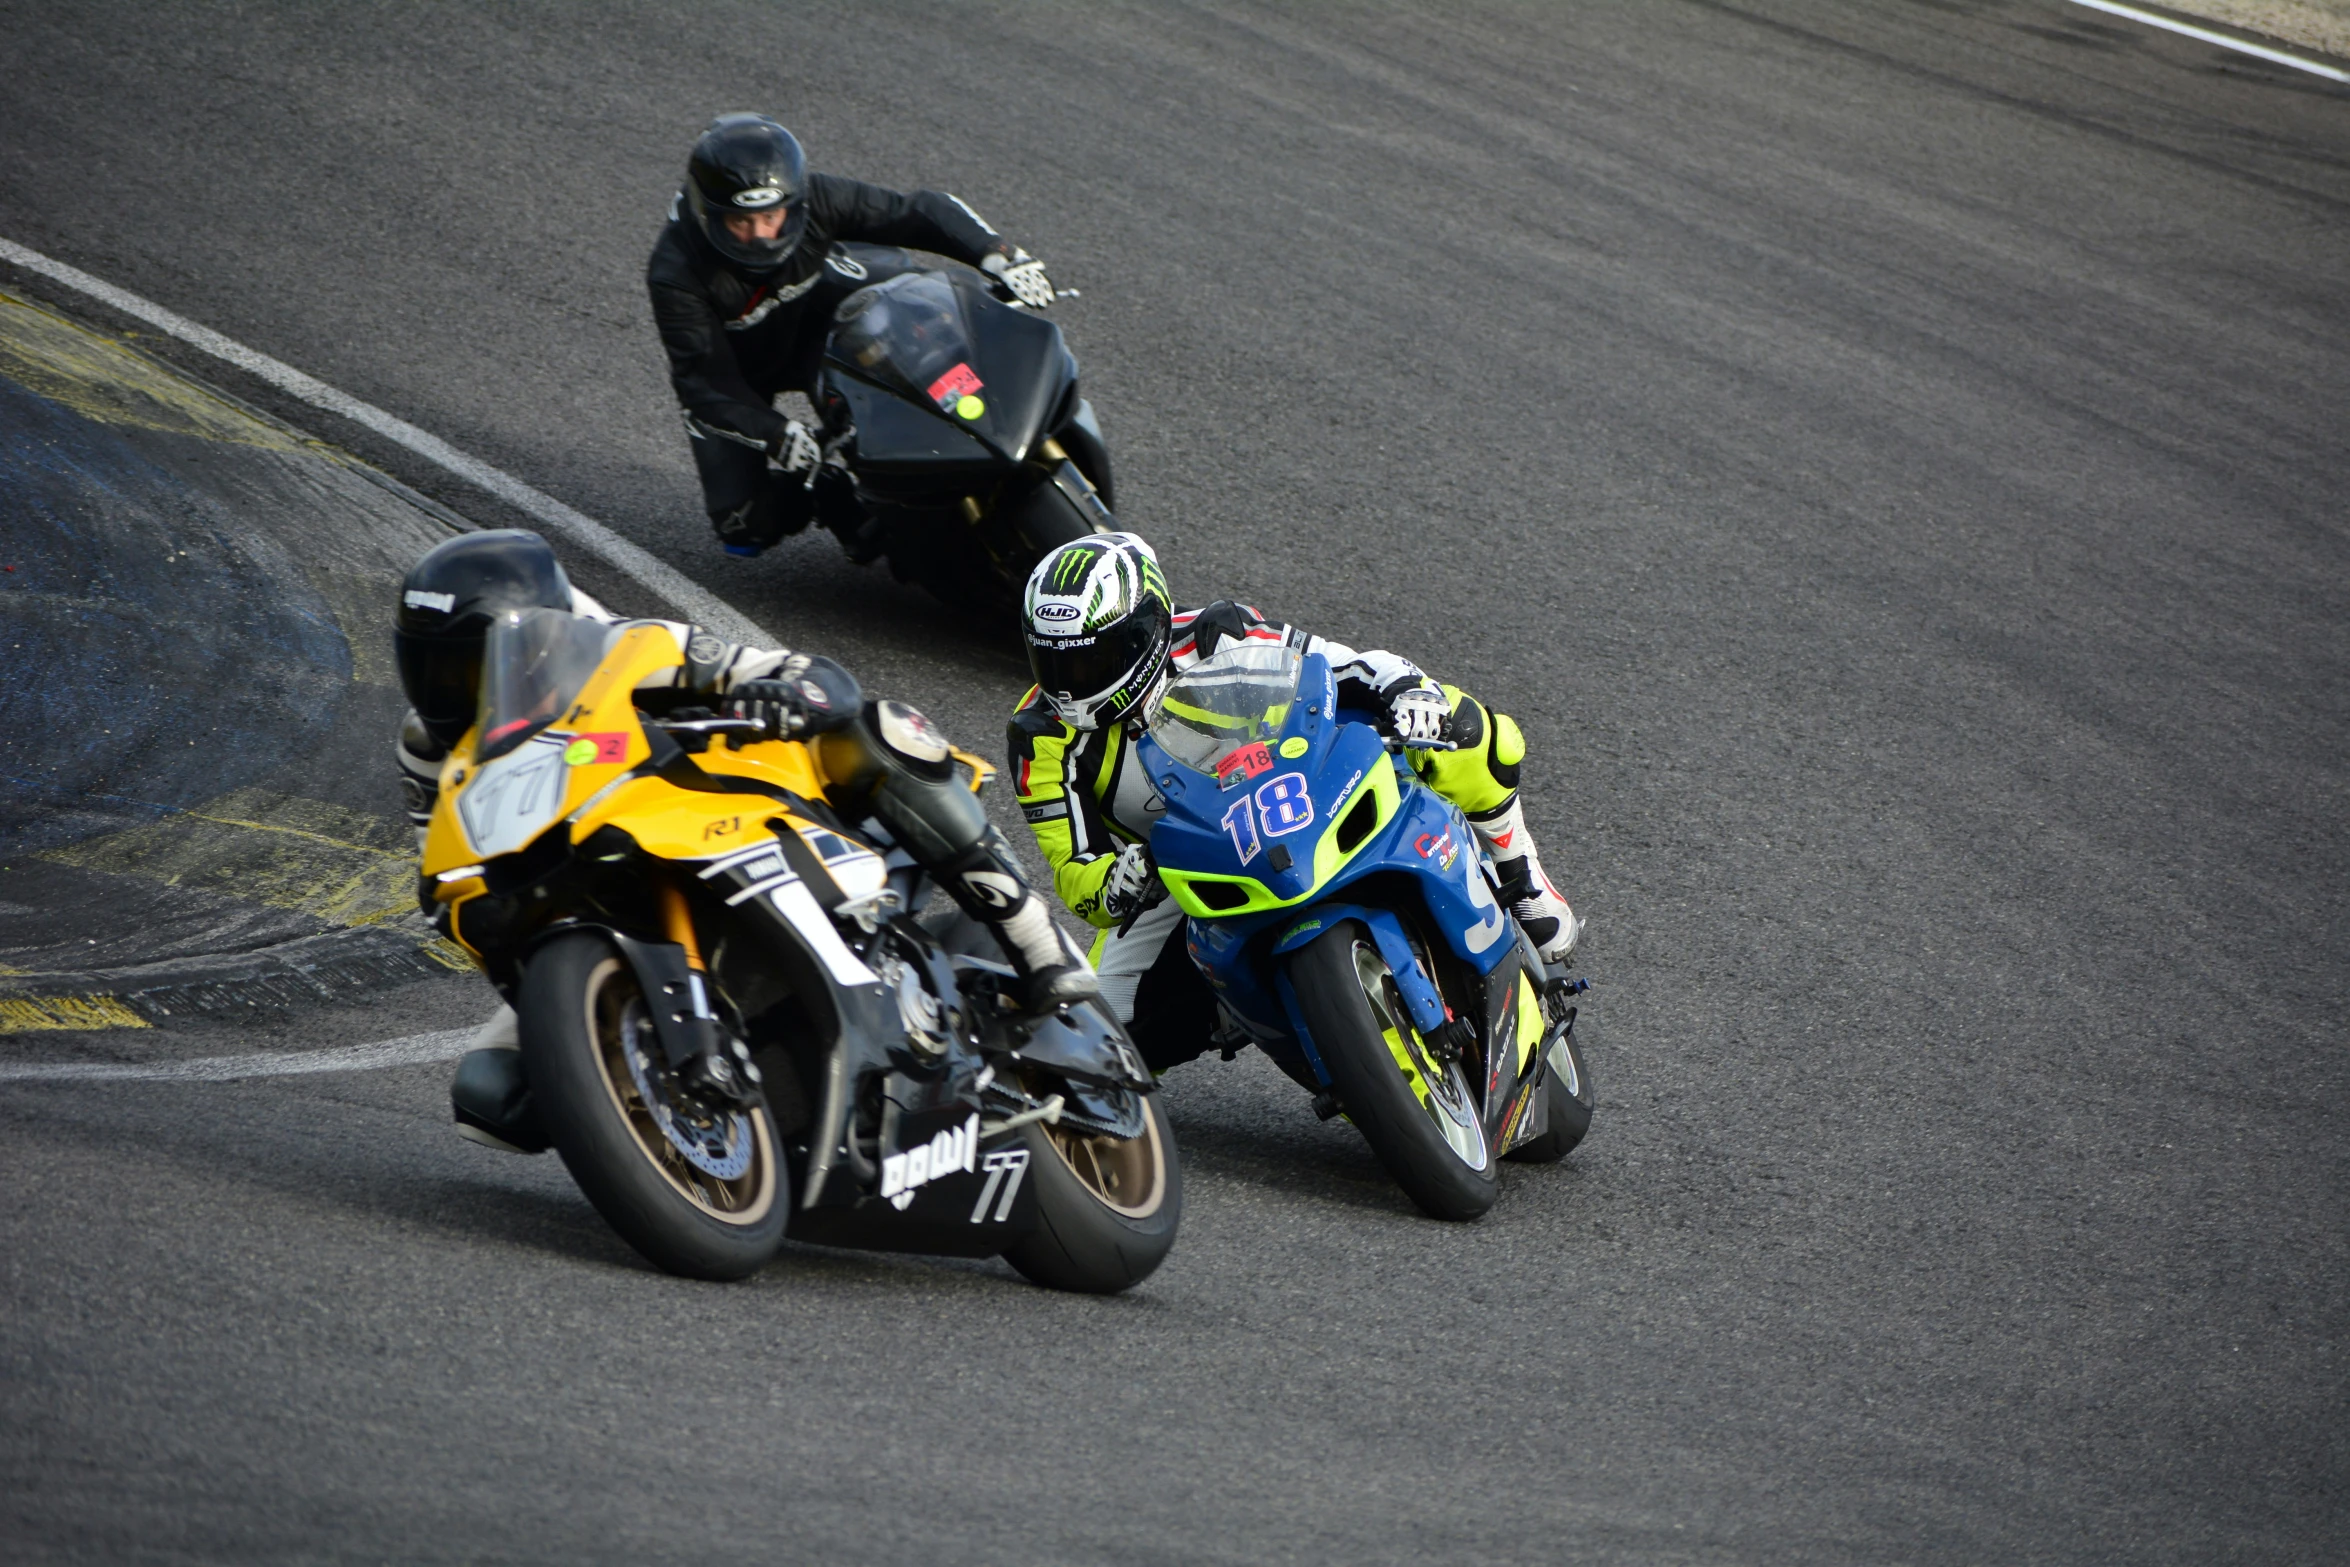 two people on motorcycles race around a curve